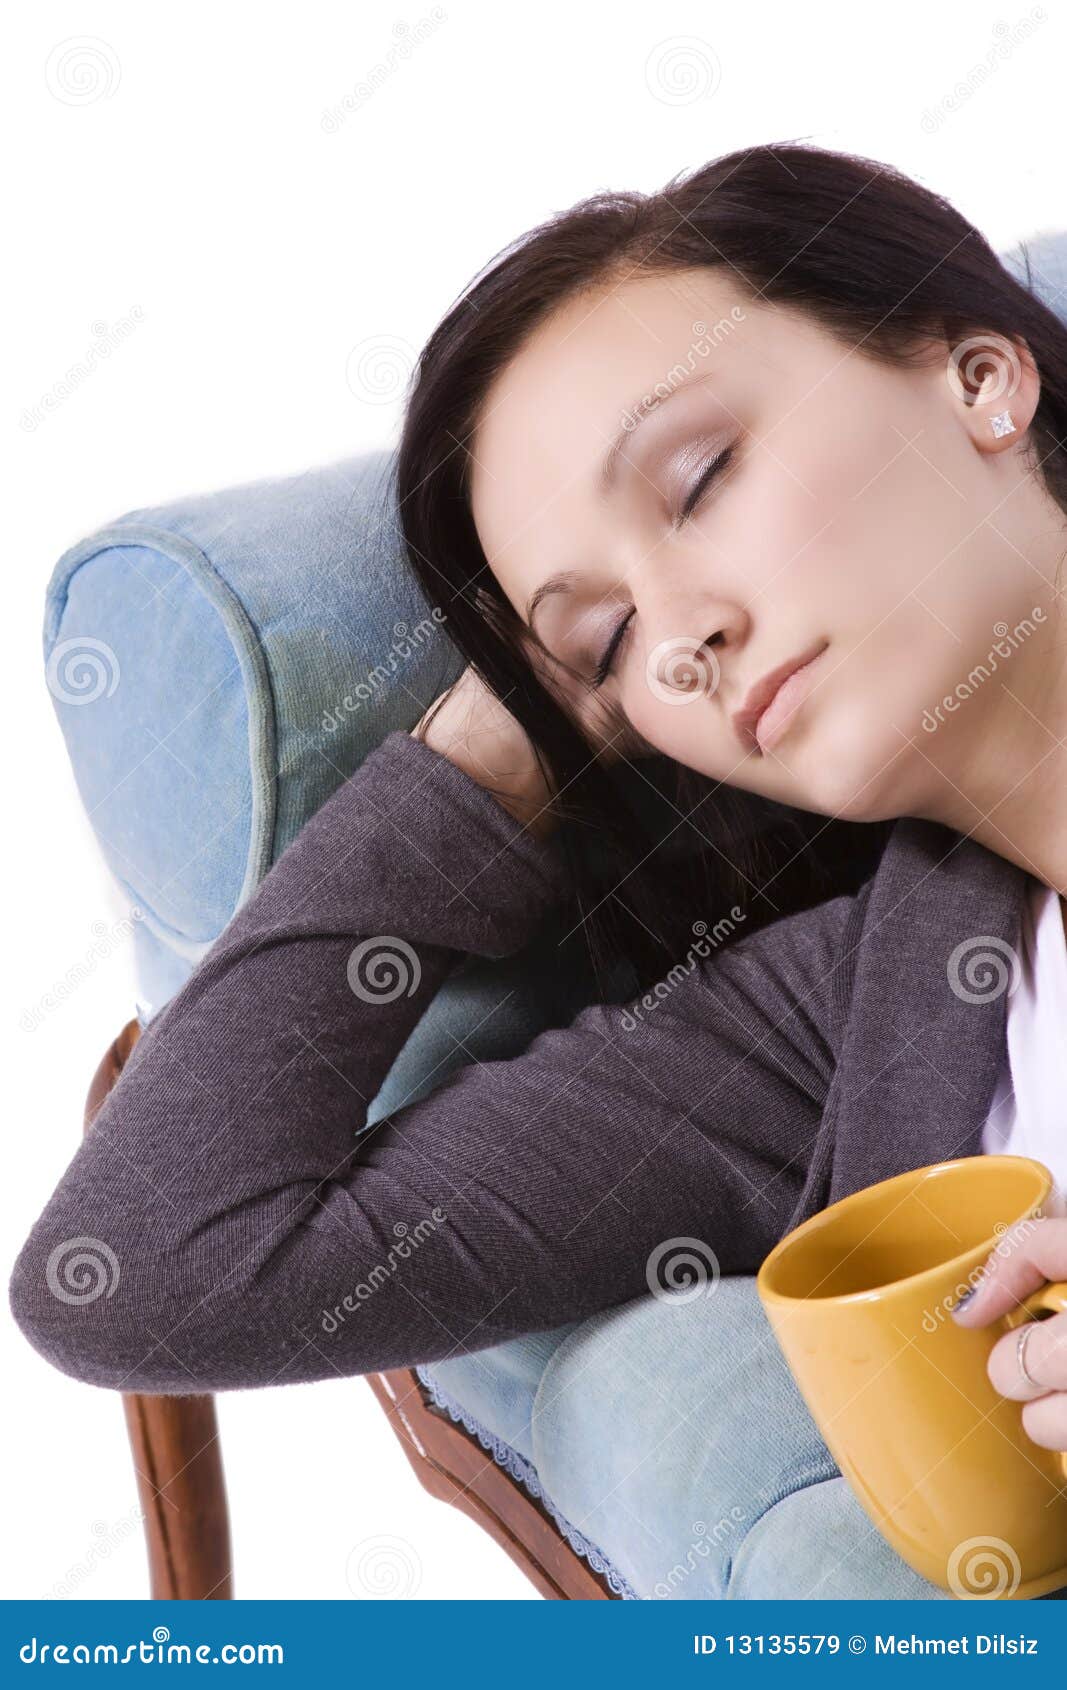 Stylish Cute Girl Sleeping On The Couch Stock Image Image Of Brunette